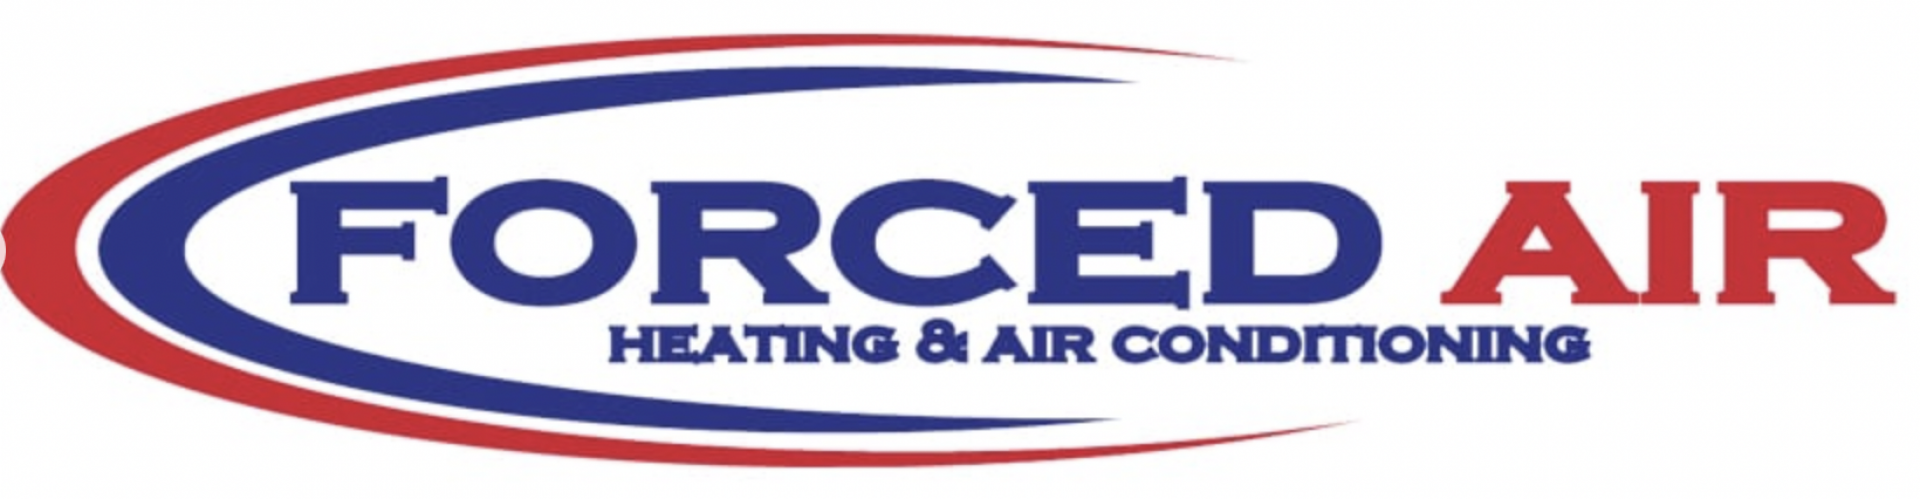 Forced Air Heating and Air Conditioning logo